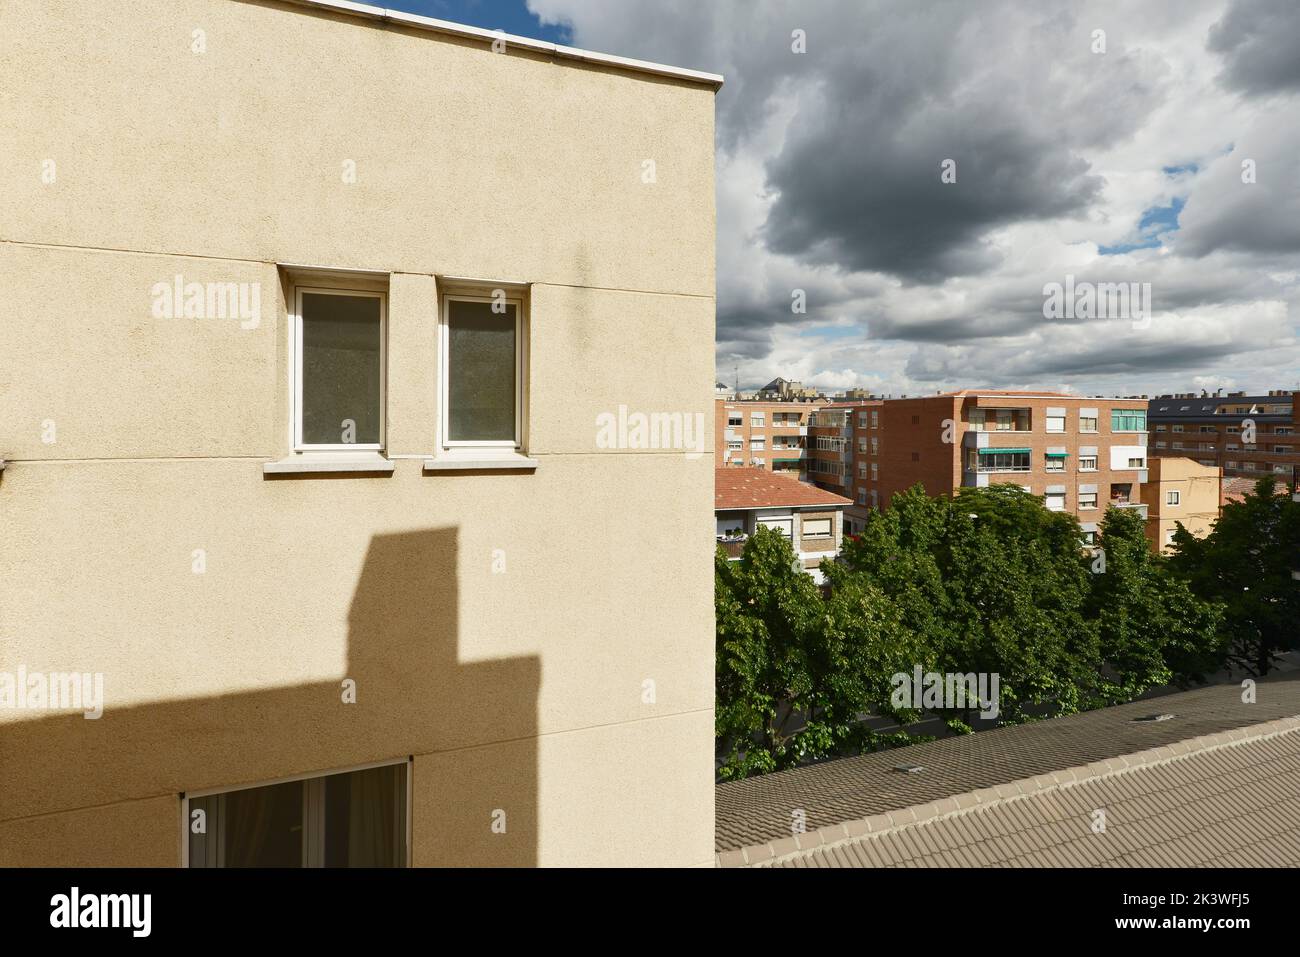 Facade of a house with a light wall, small white aluminum windows and rain-bearing clouds Stock Photo